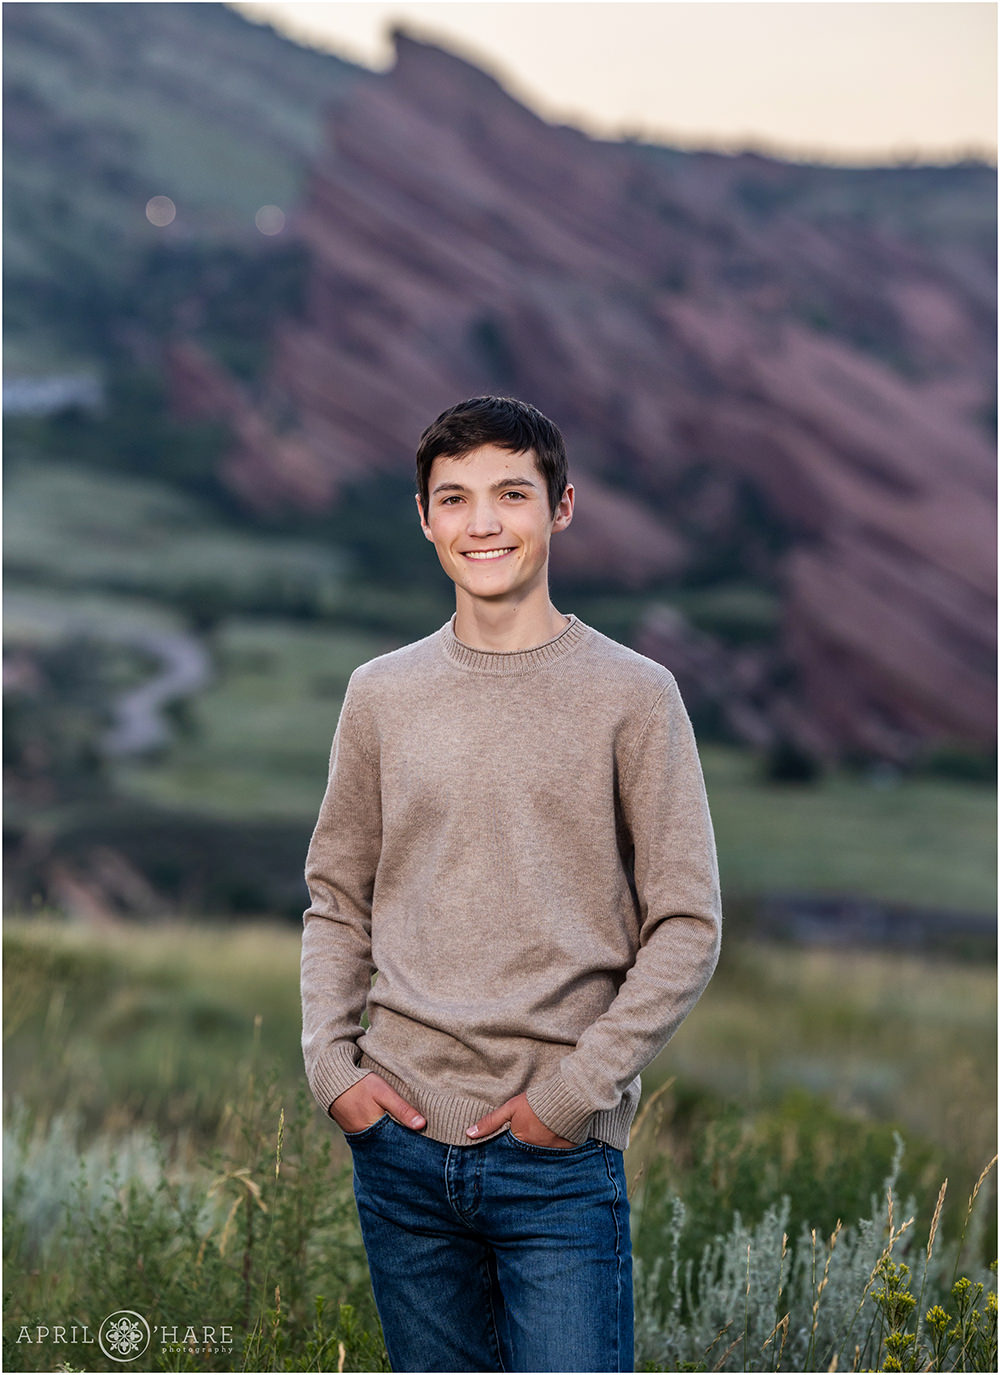 Red Rocks Amphitheater backdrop for a senior session at Morrison Trailhead